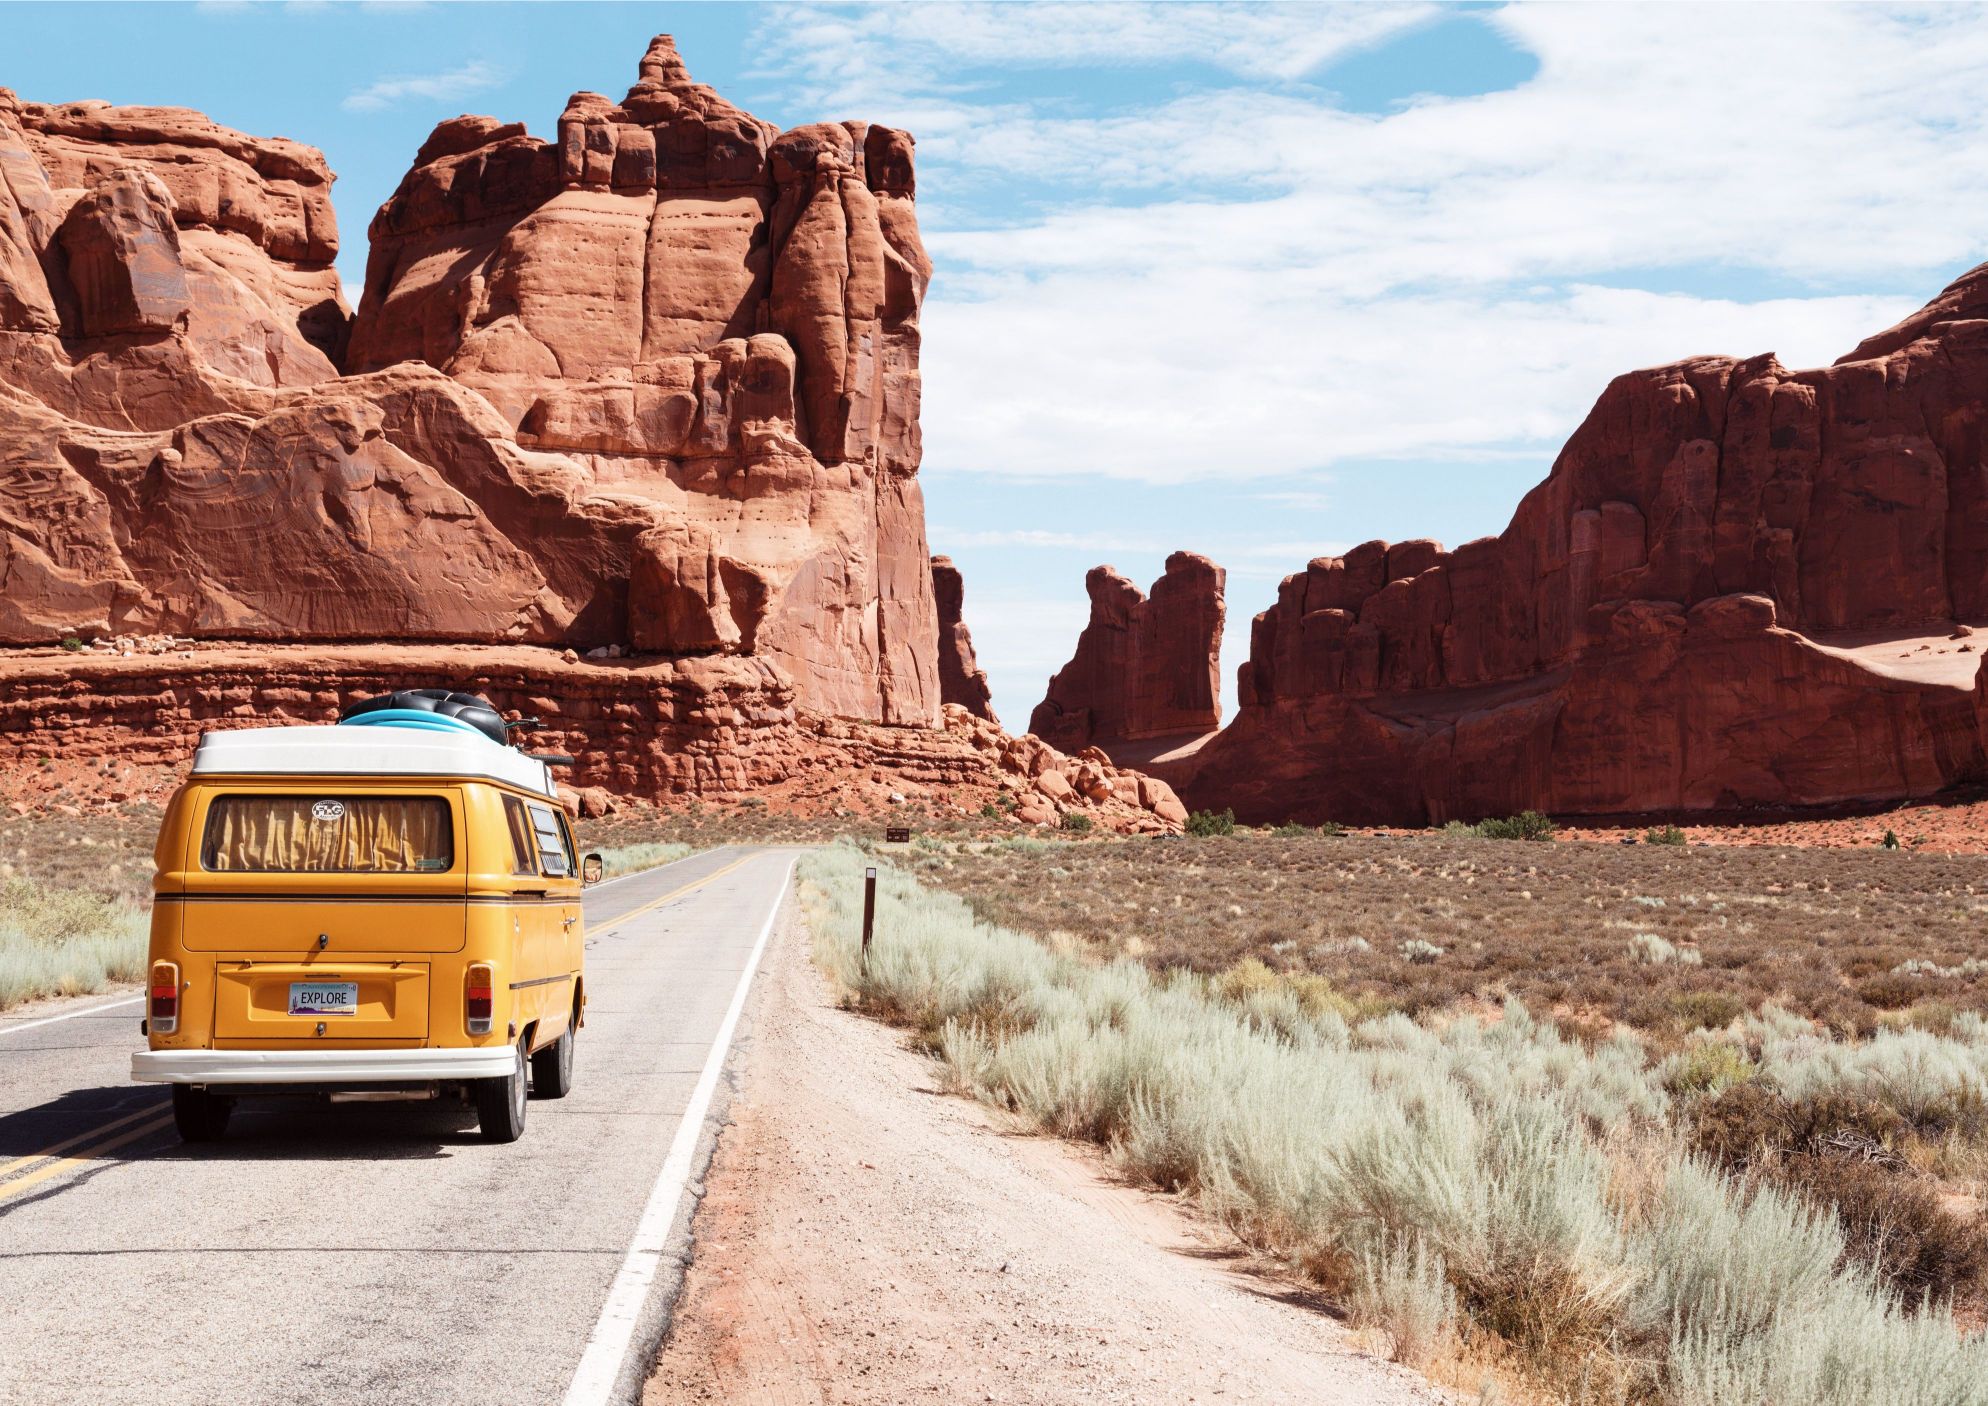 A converted van on the road in a dry and dusty American national park